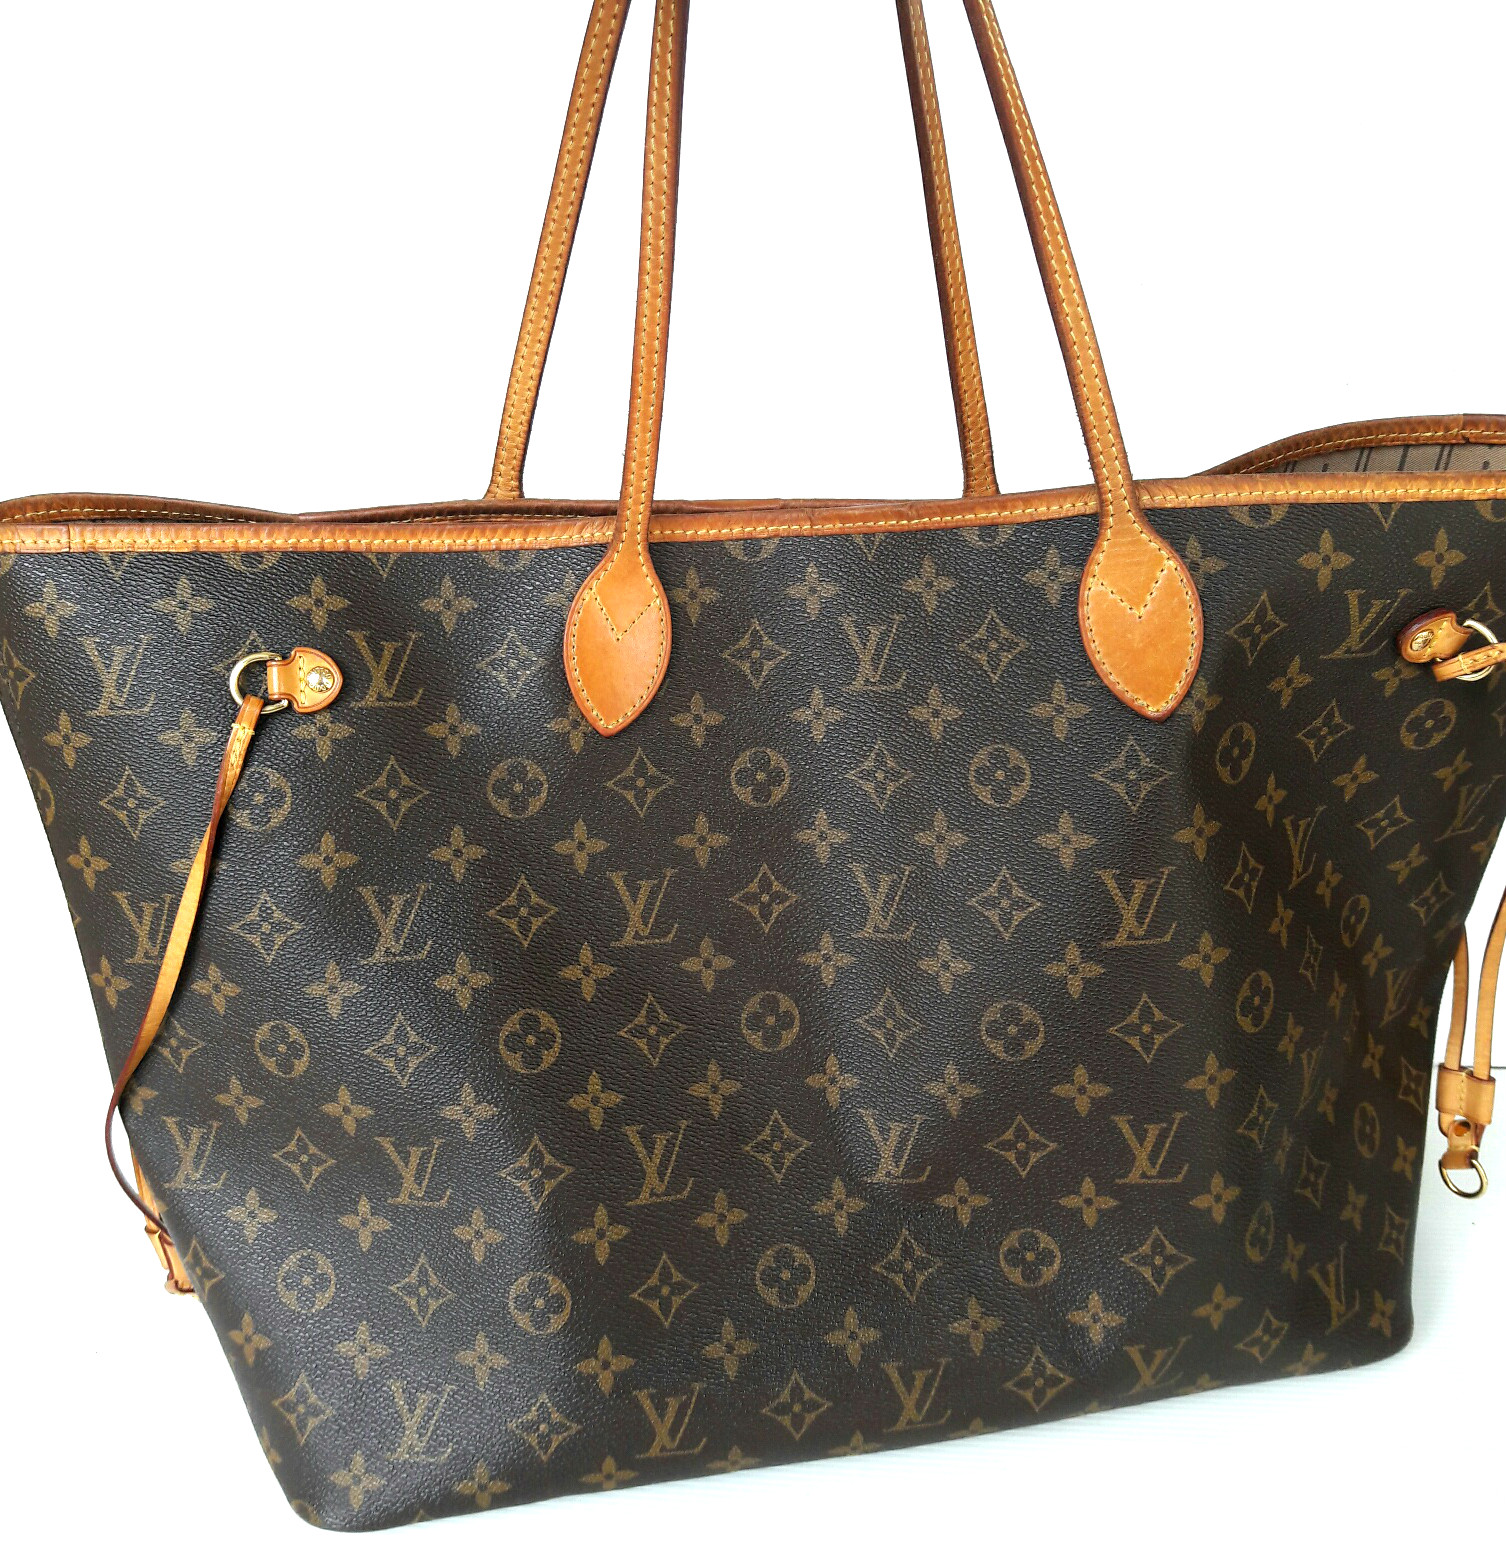 Sold at Auction: A Beautiful Limited Edition, 2008 Autumn/Winter  Collection, Louis Vuitton Paris Souple Whisper Tote